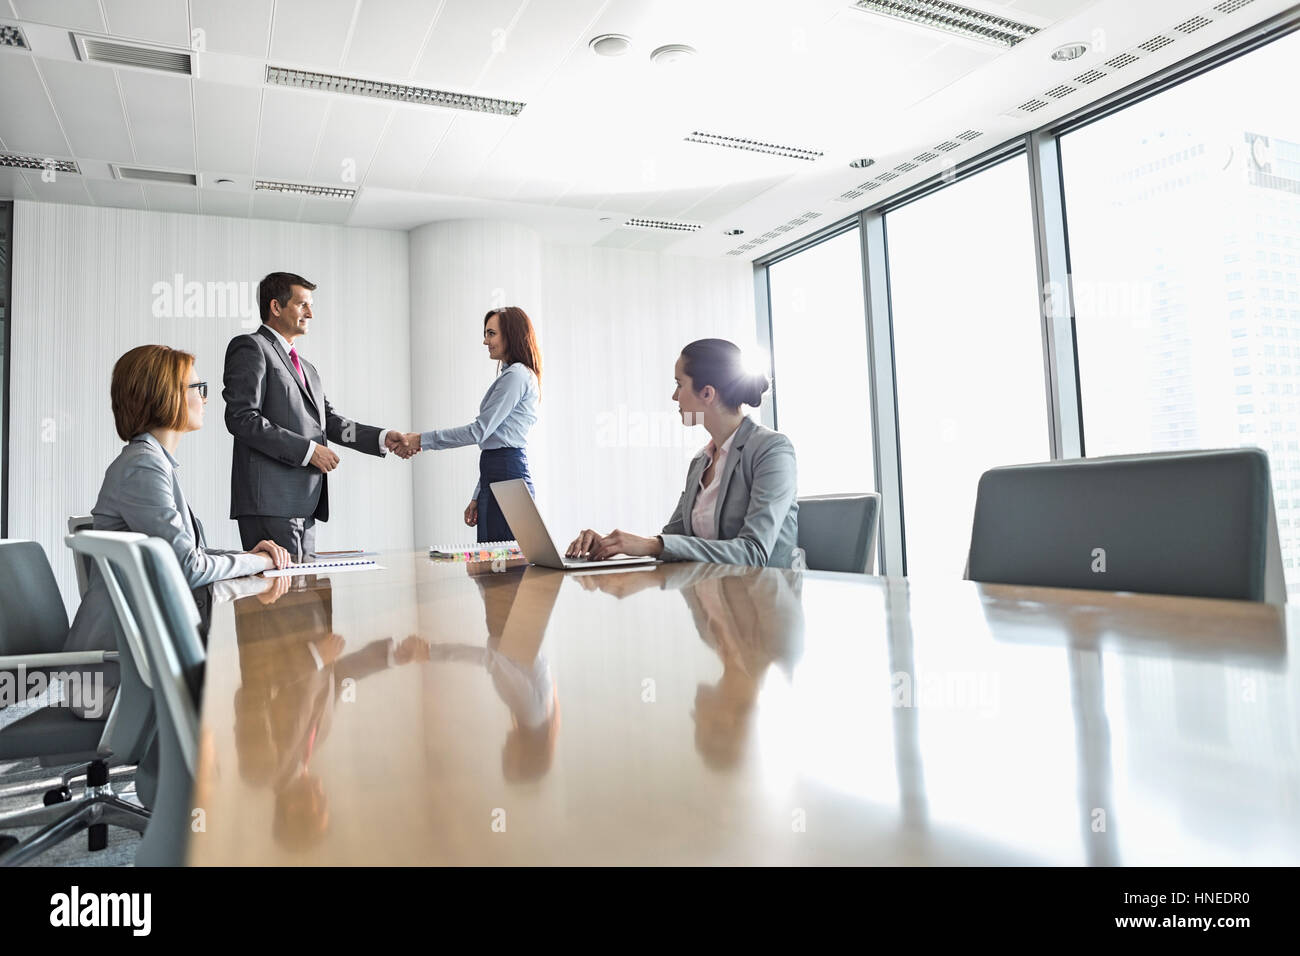 Businessman and businesswoman shaking hands in conference room Banque D'Images